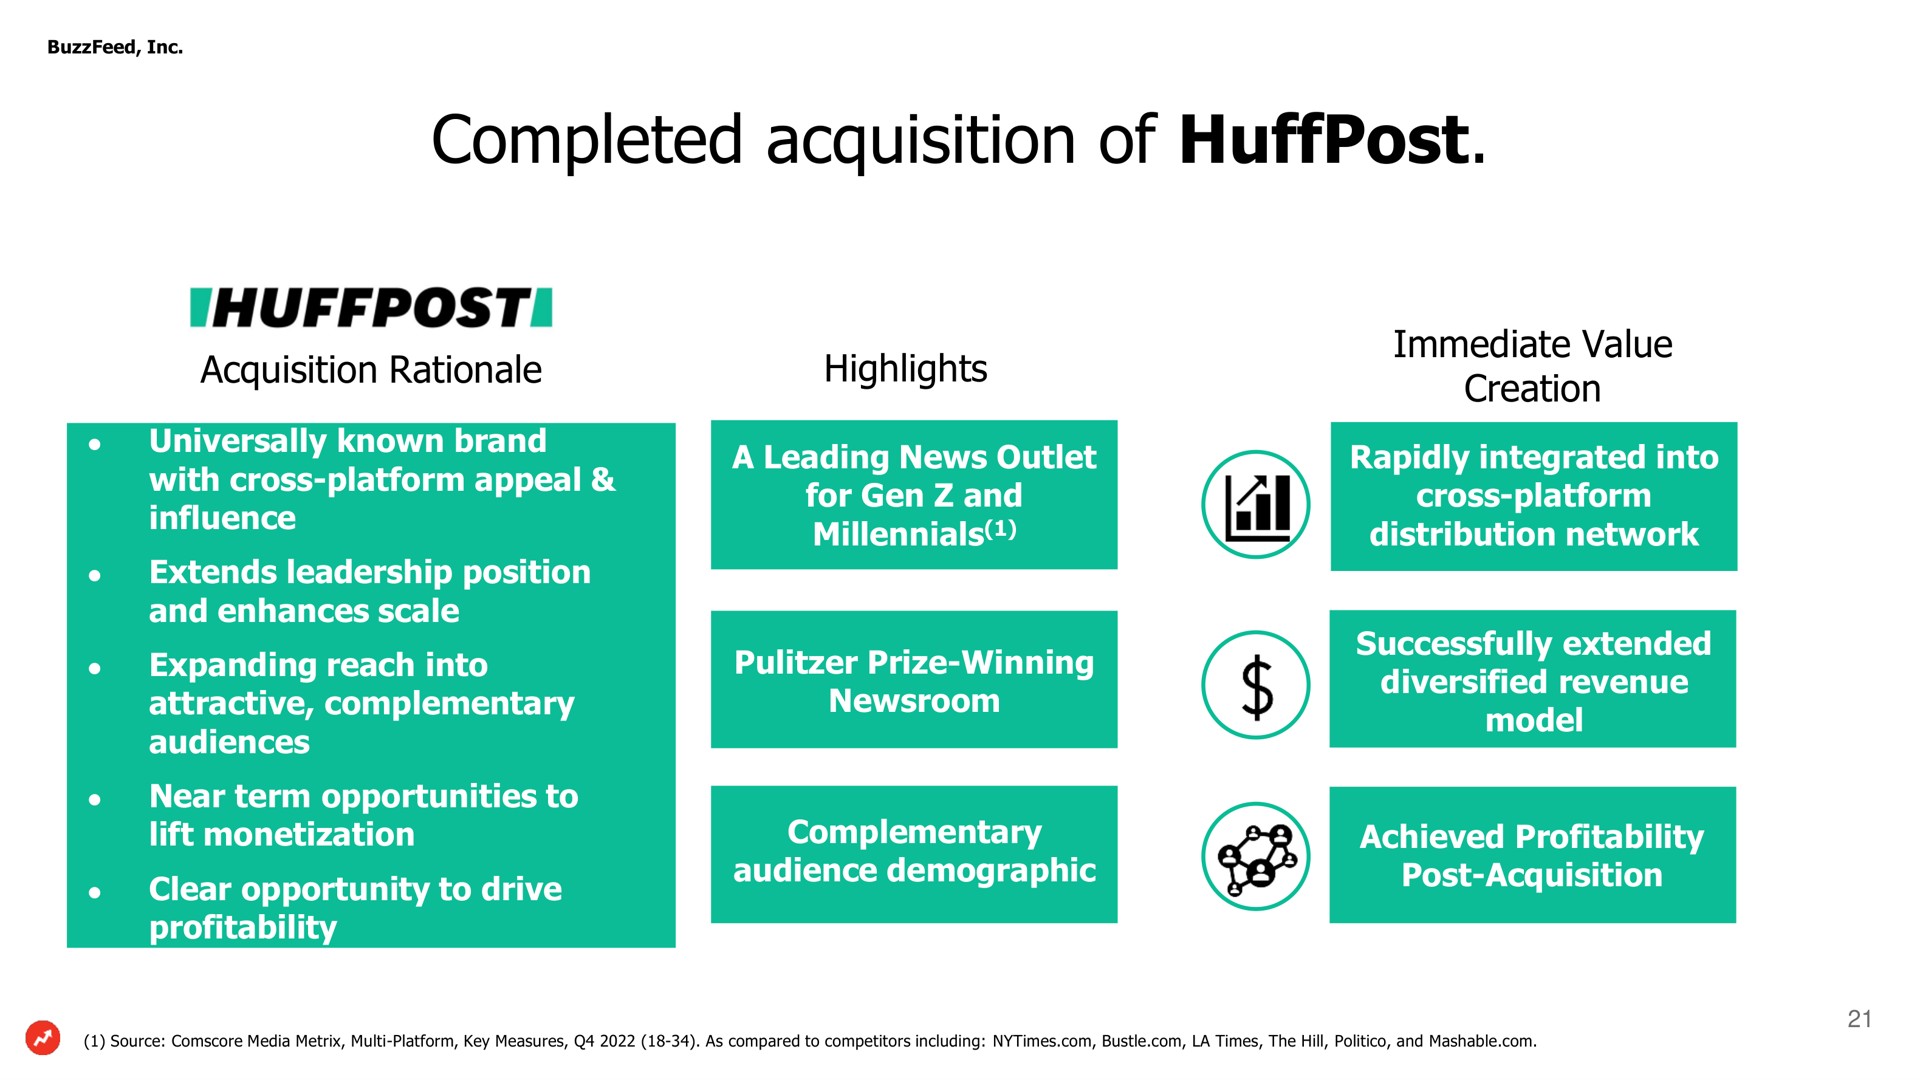 completed acquisition of highlights rationale | BuzzFeed